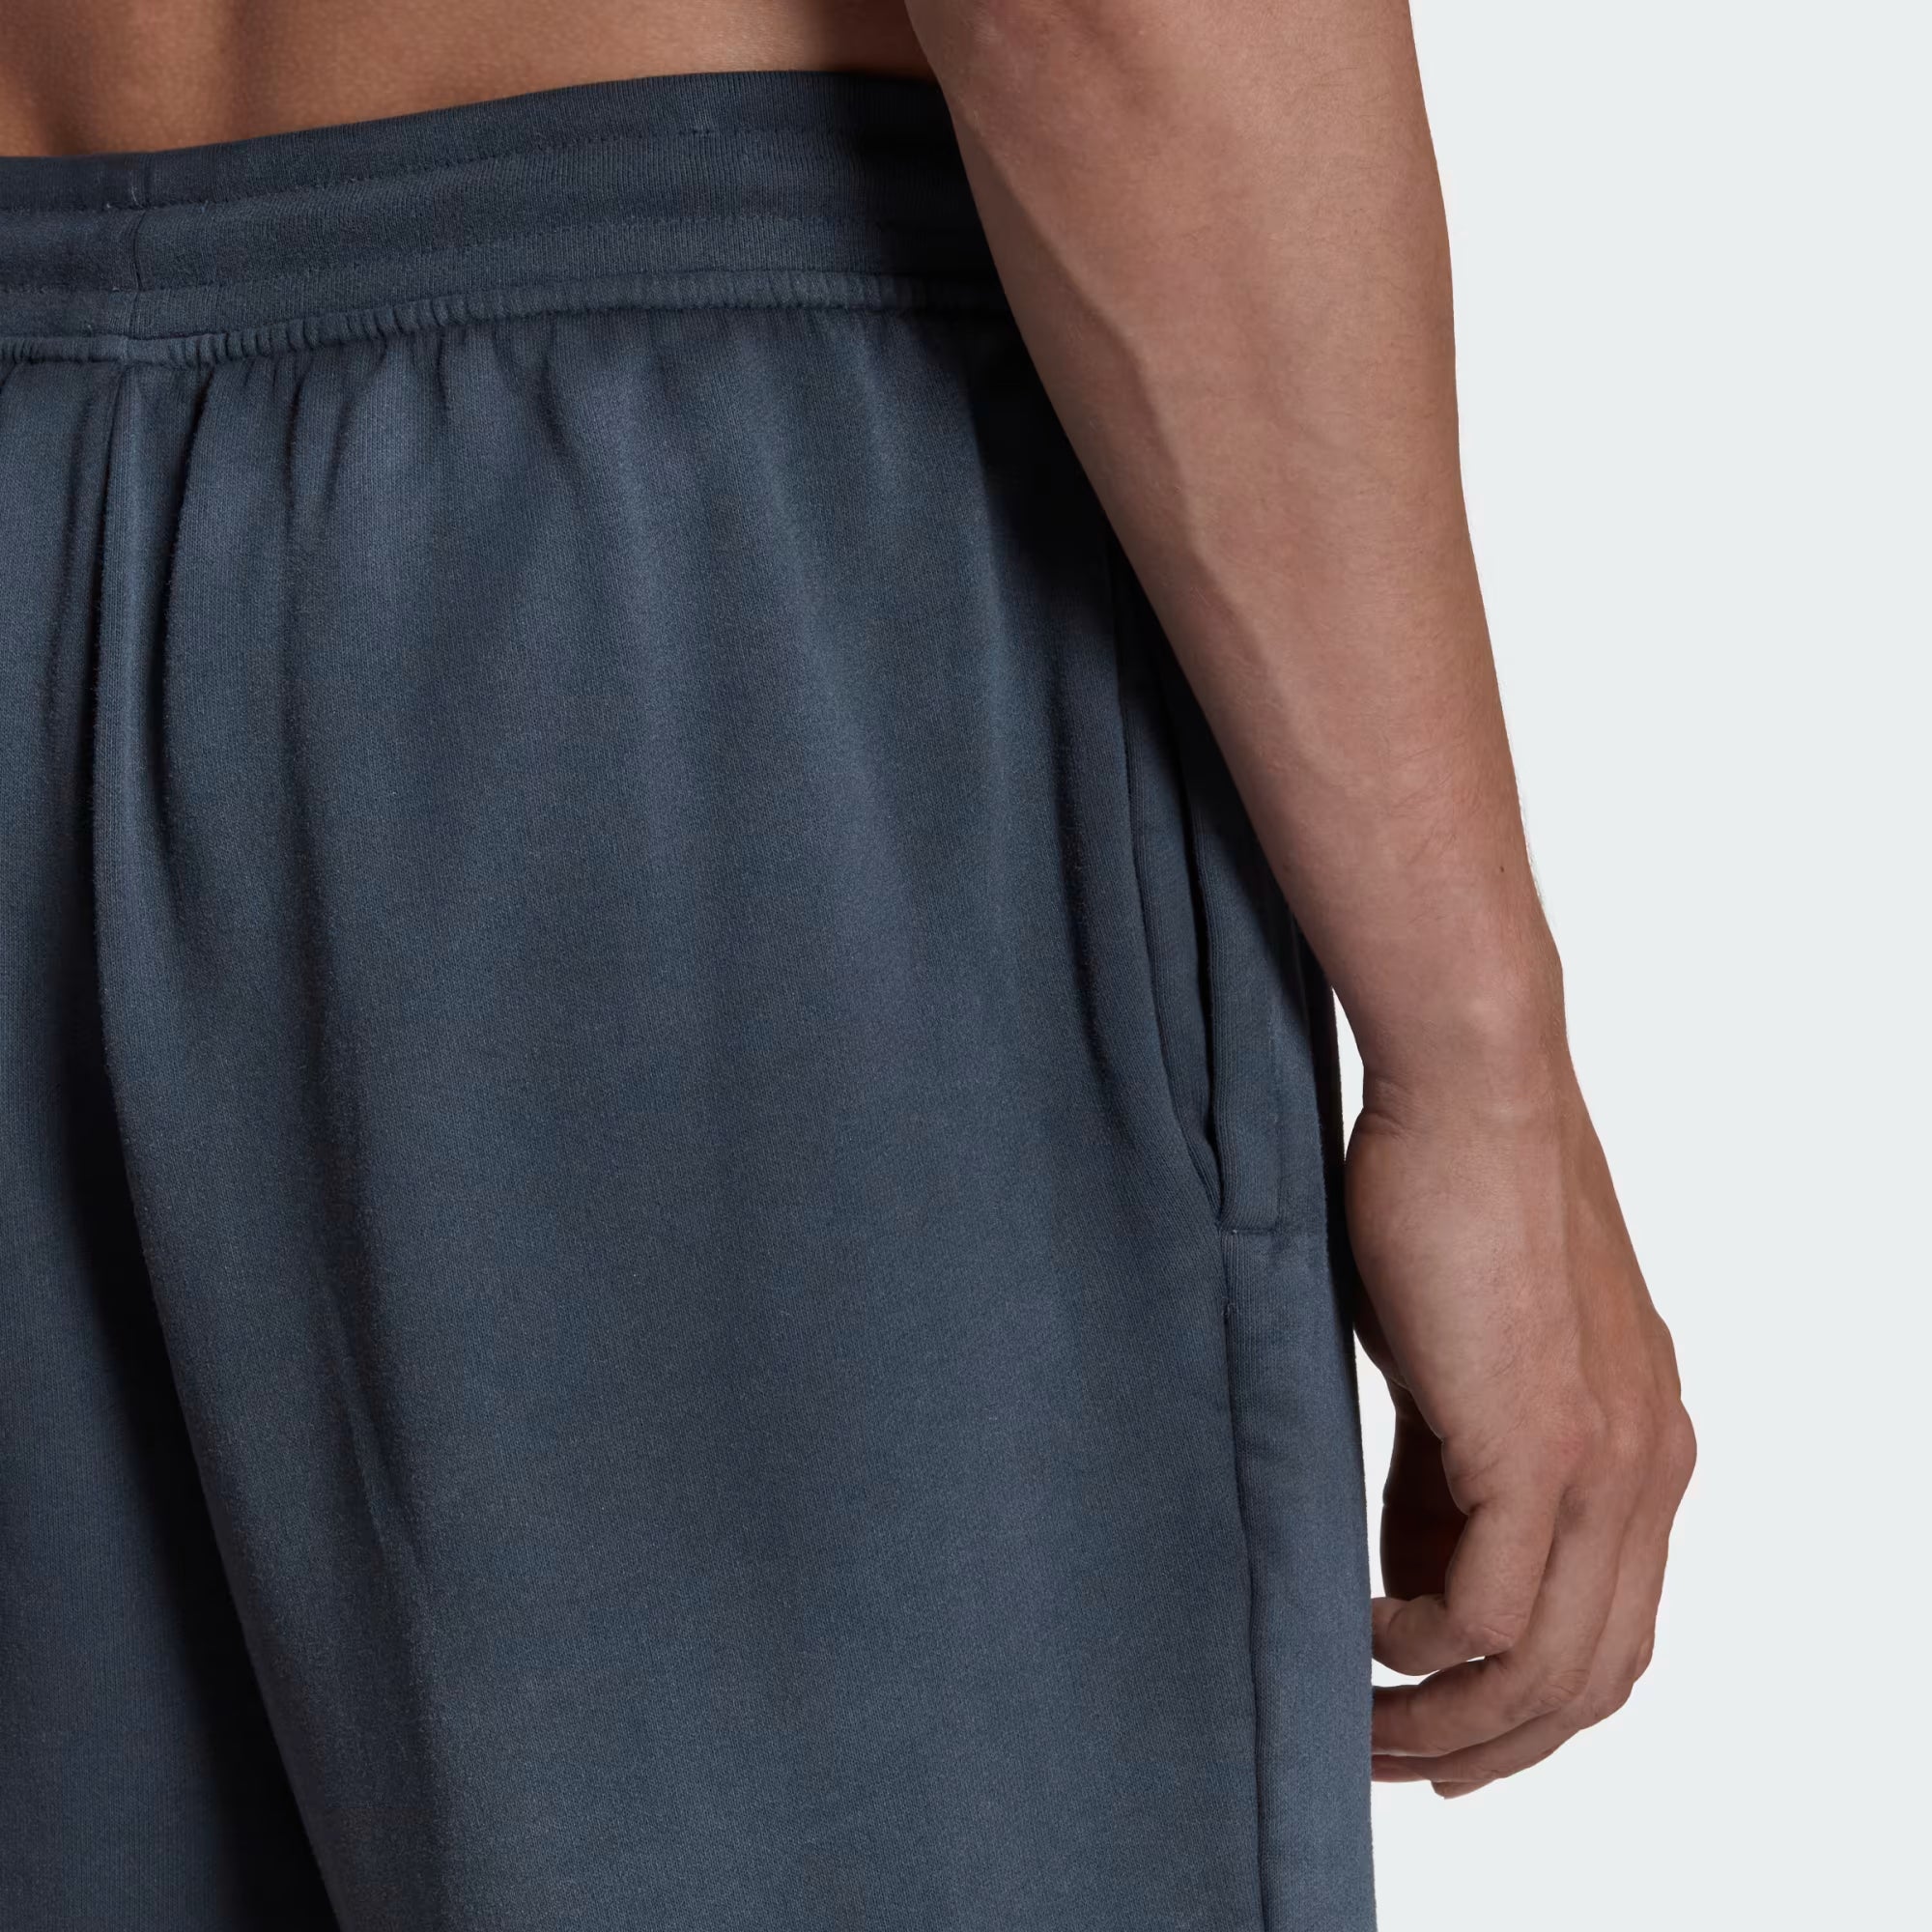 Adidas Essentials+ Made With Nature Shorts - Men